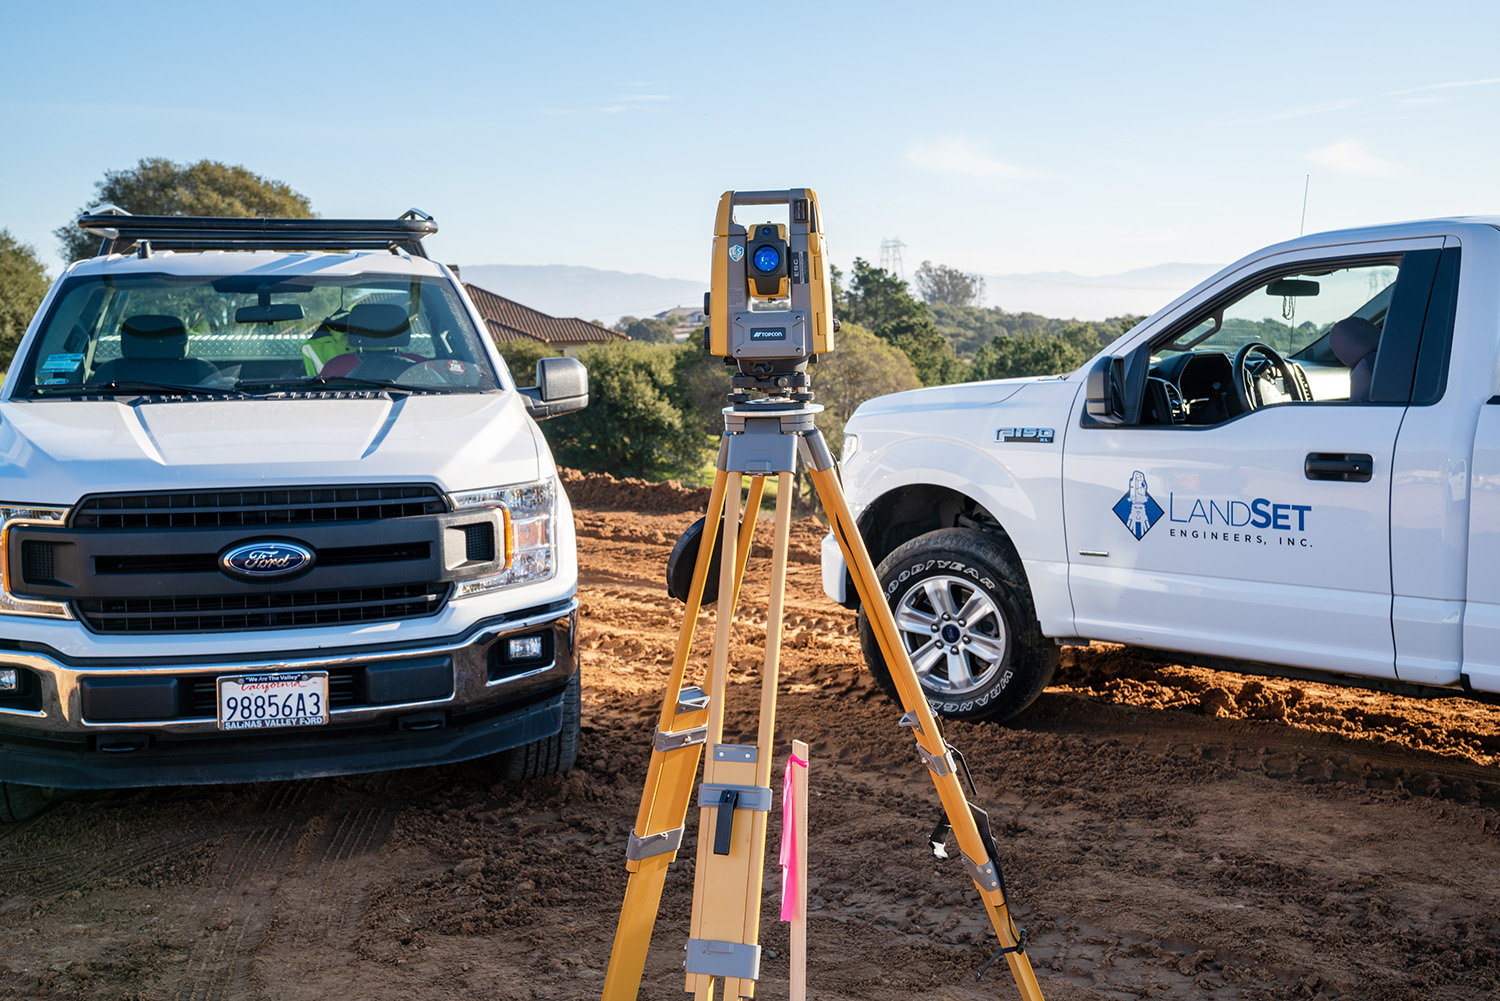 Business Sectors: Land Surveying